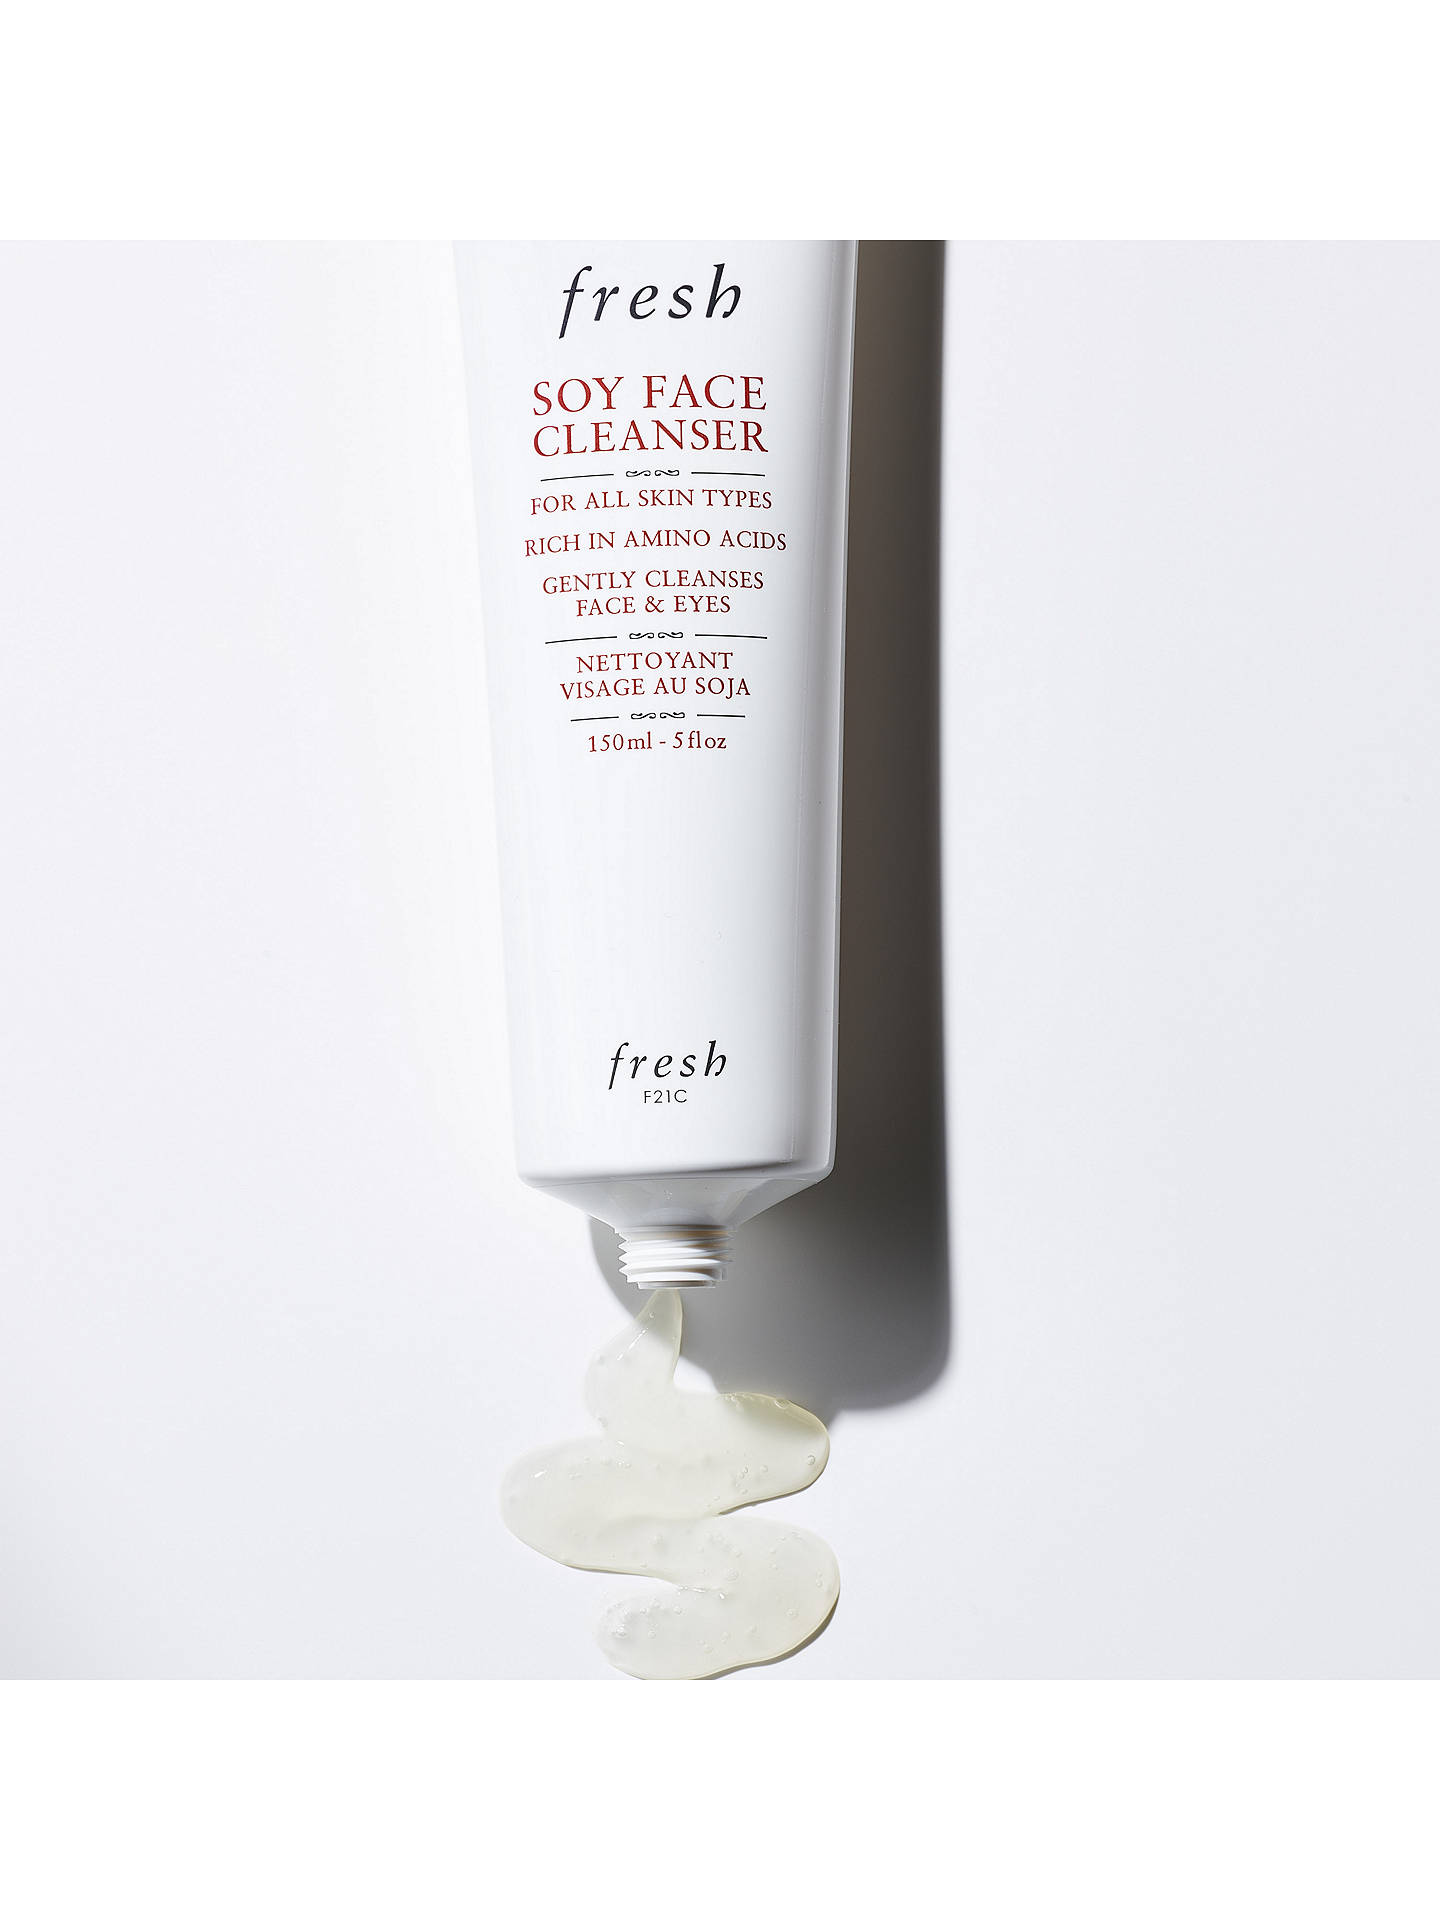 Fresh Soy Face Cleanser at John Lewis & Partners